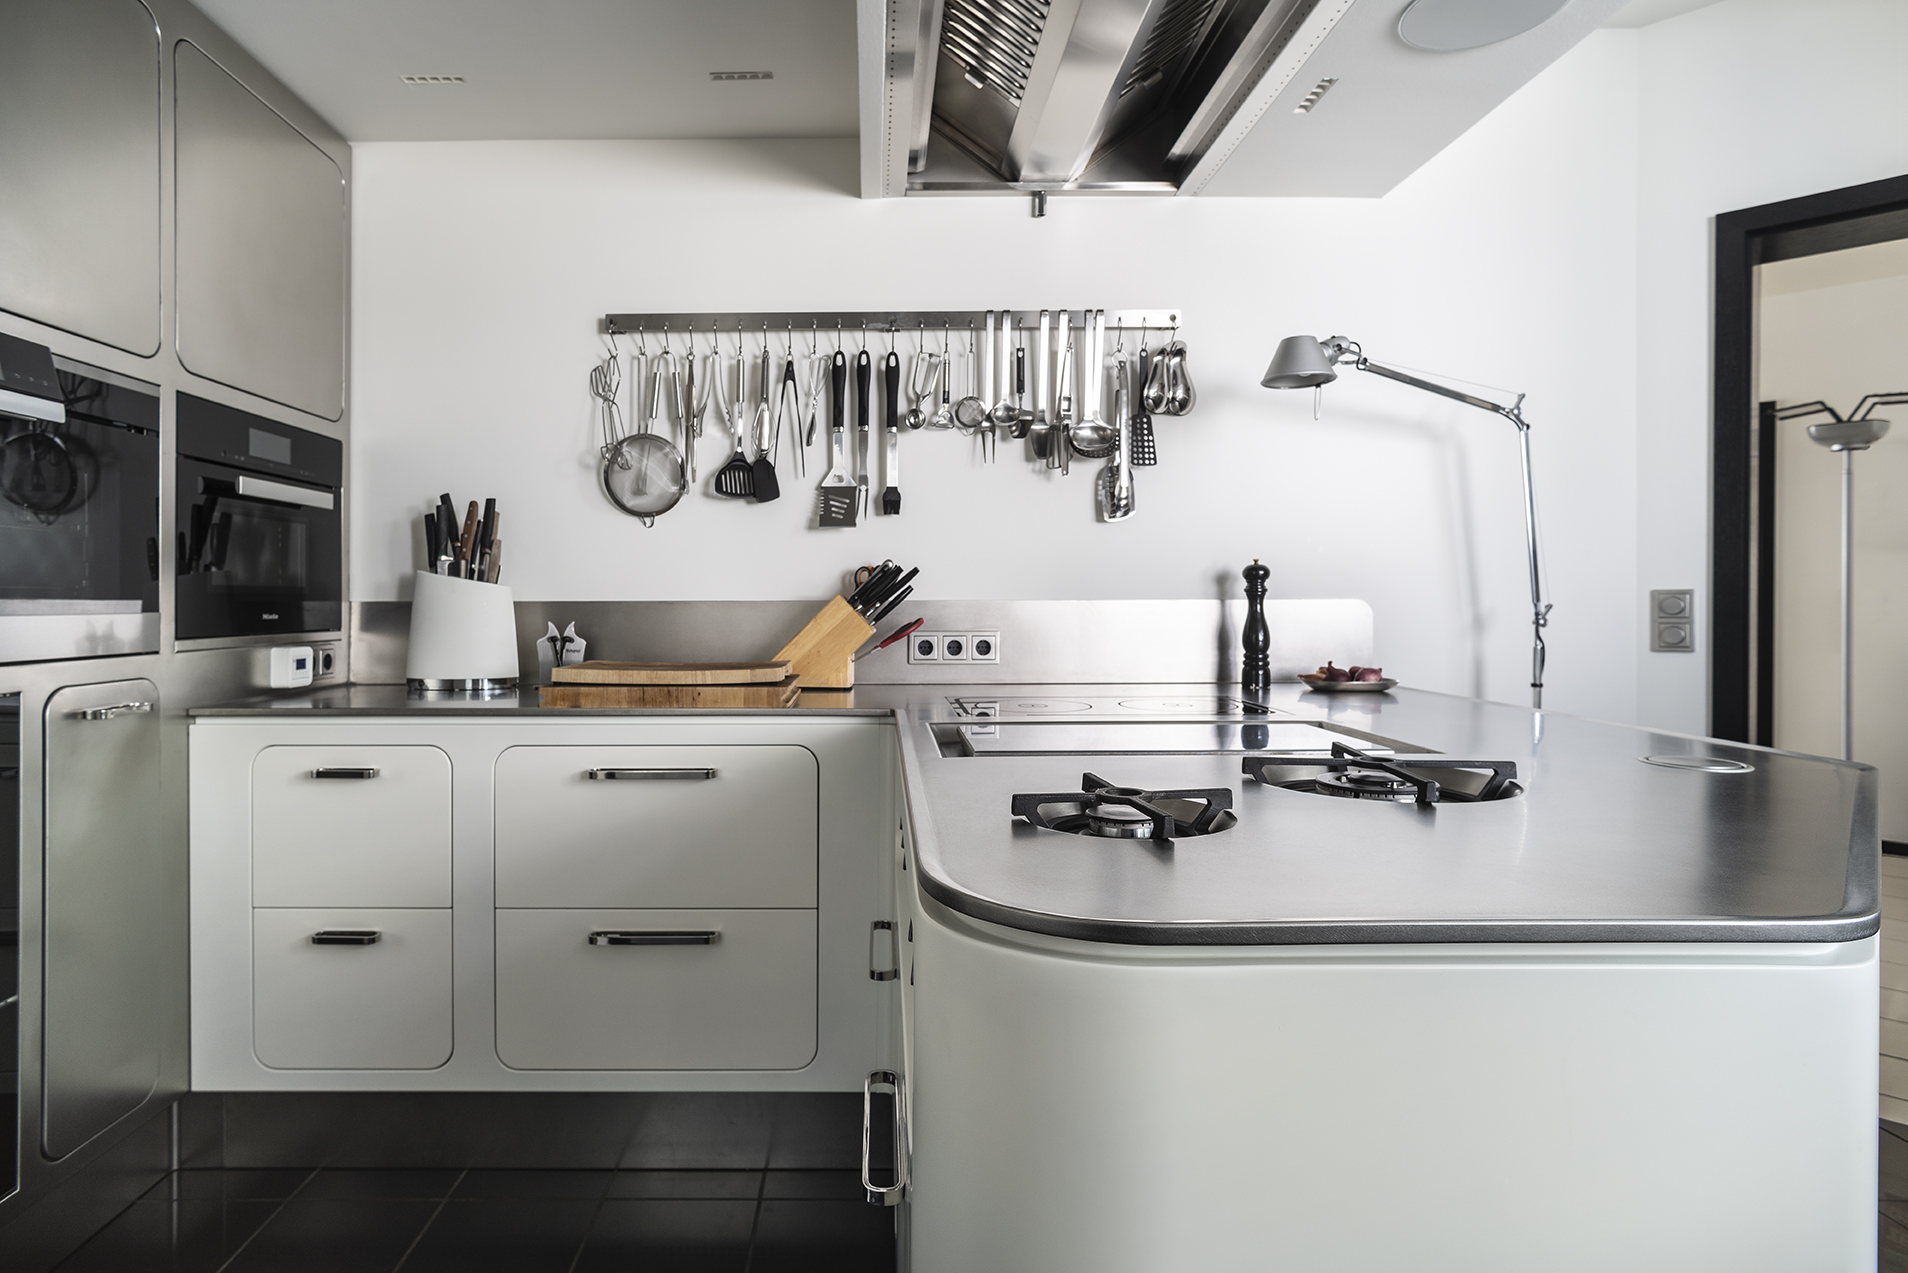 Stainless steel kitchens are the new luxe trend to try